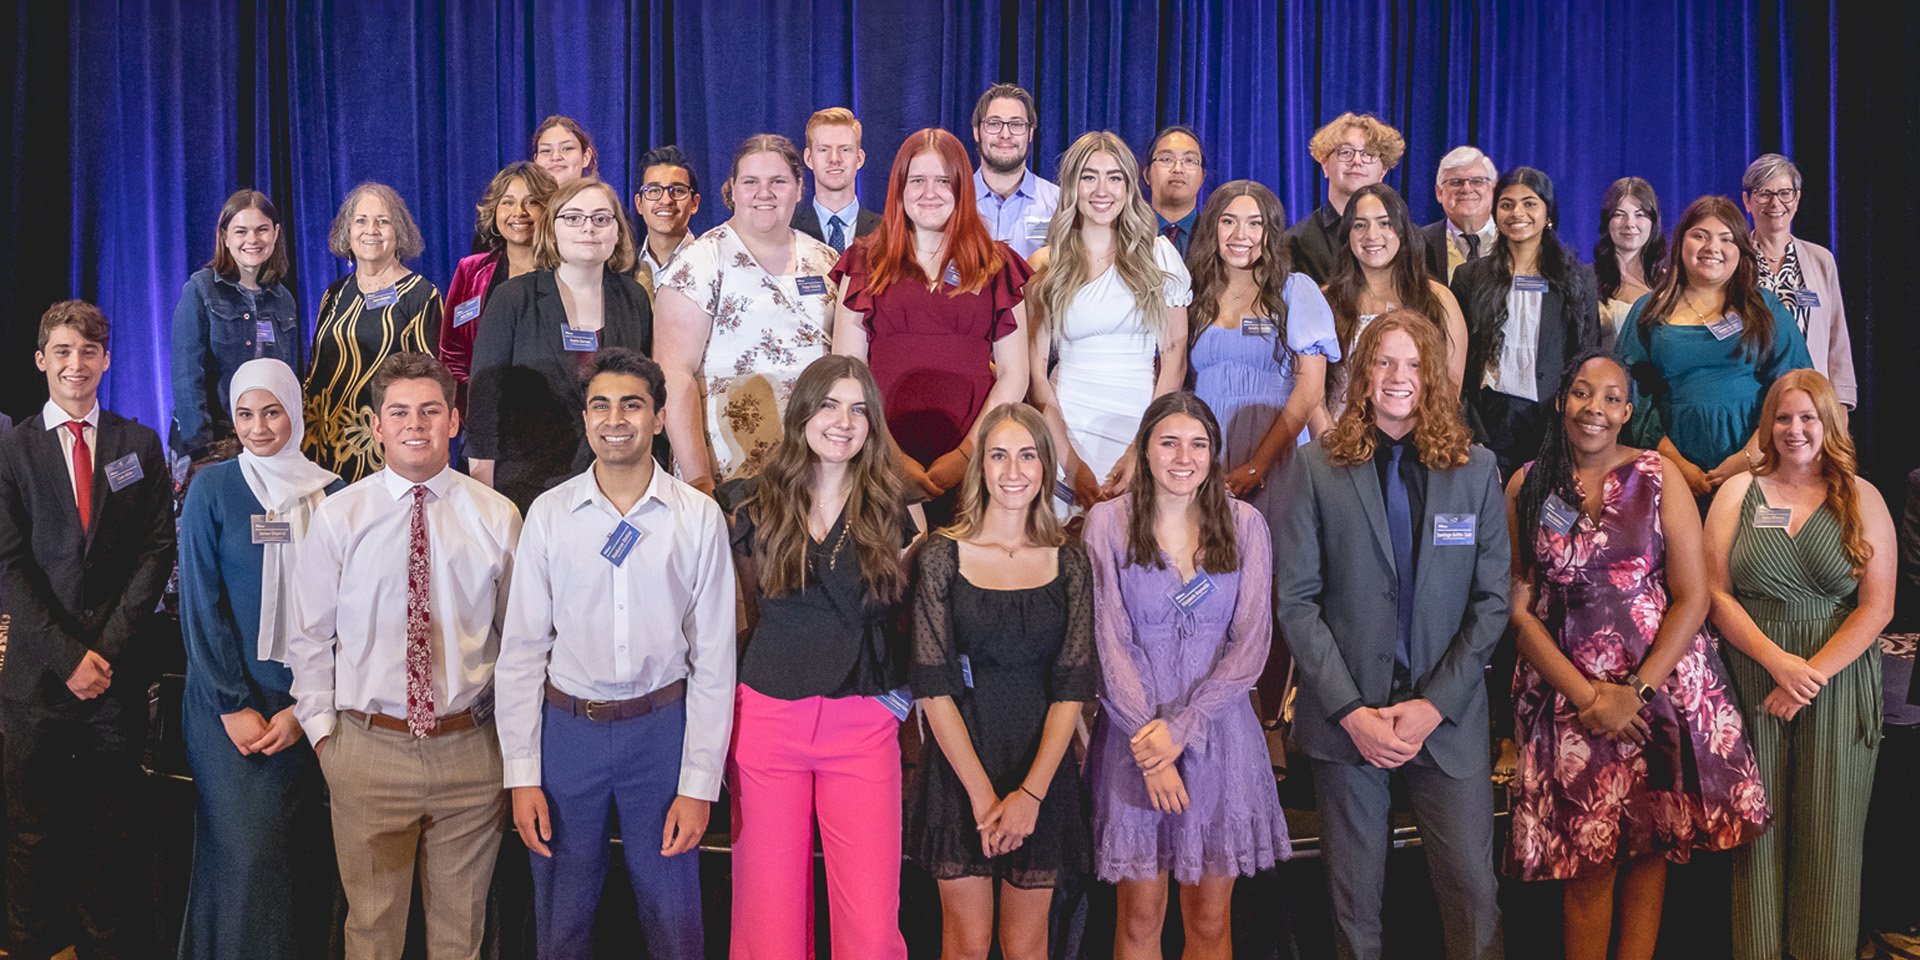 Jeff Meshey proudly stands alongside a group of 30 senior high school students who have been honored with the Community Service Scholarship.